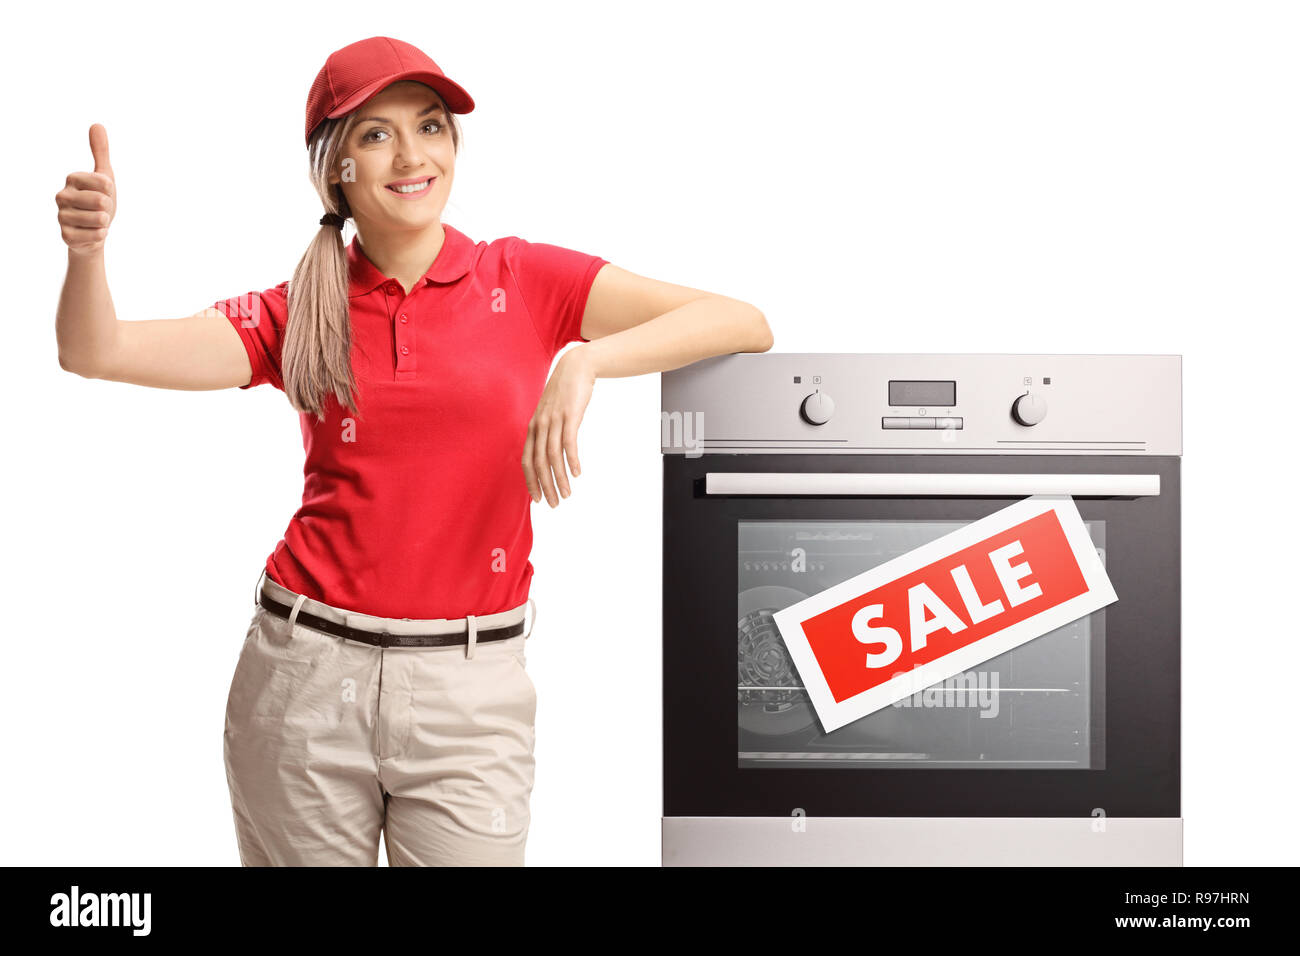 Saleswoman leaning on an electrical oven on sale and giving thumb up isolated on white background Stock Photo